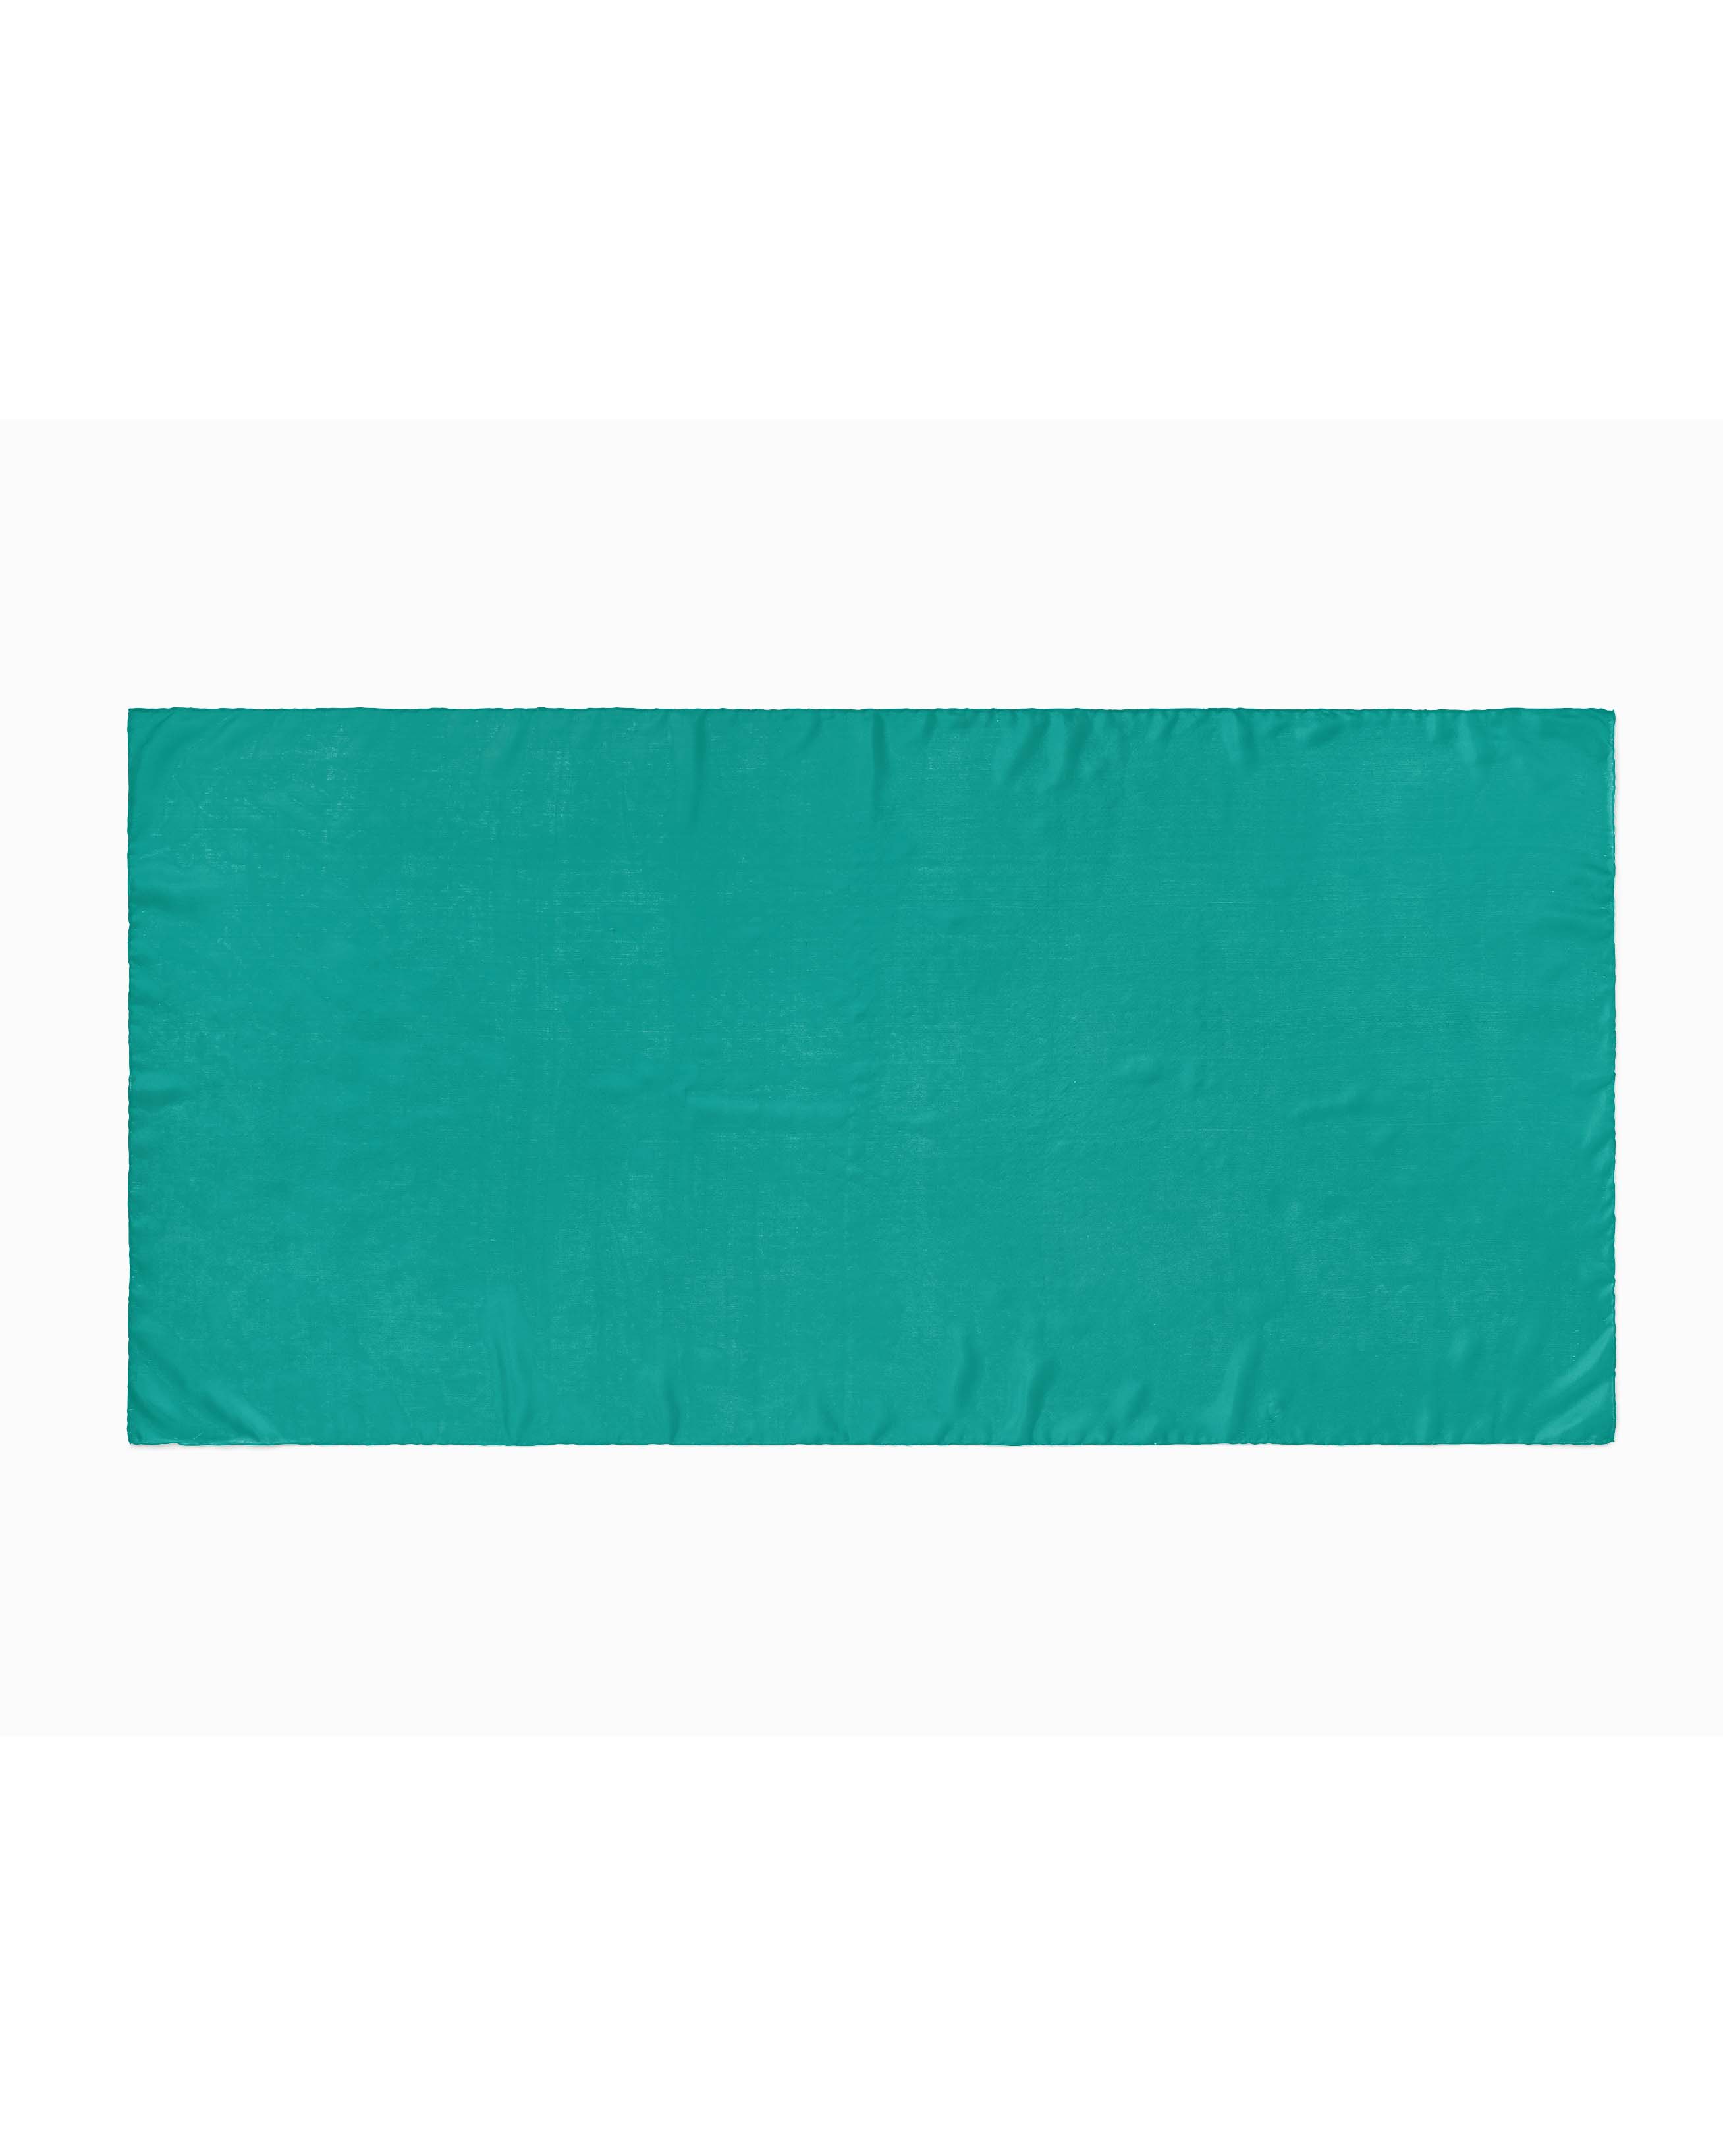 SOLID TEAL SILK WOMEN HIJAB – PREMIUM COLLECTION